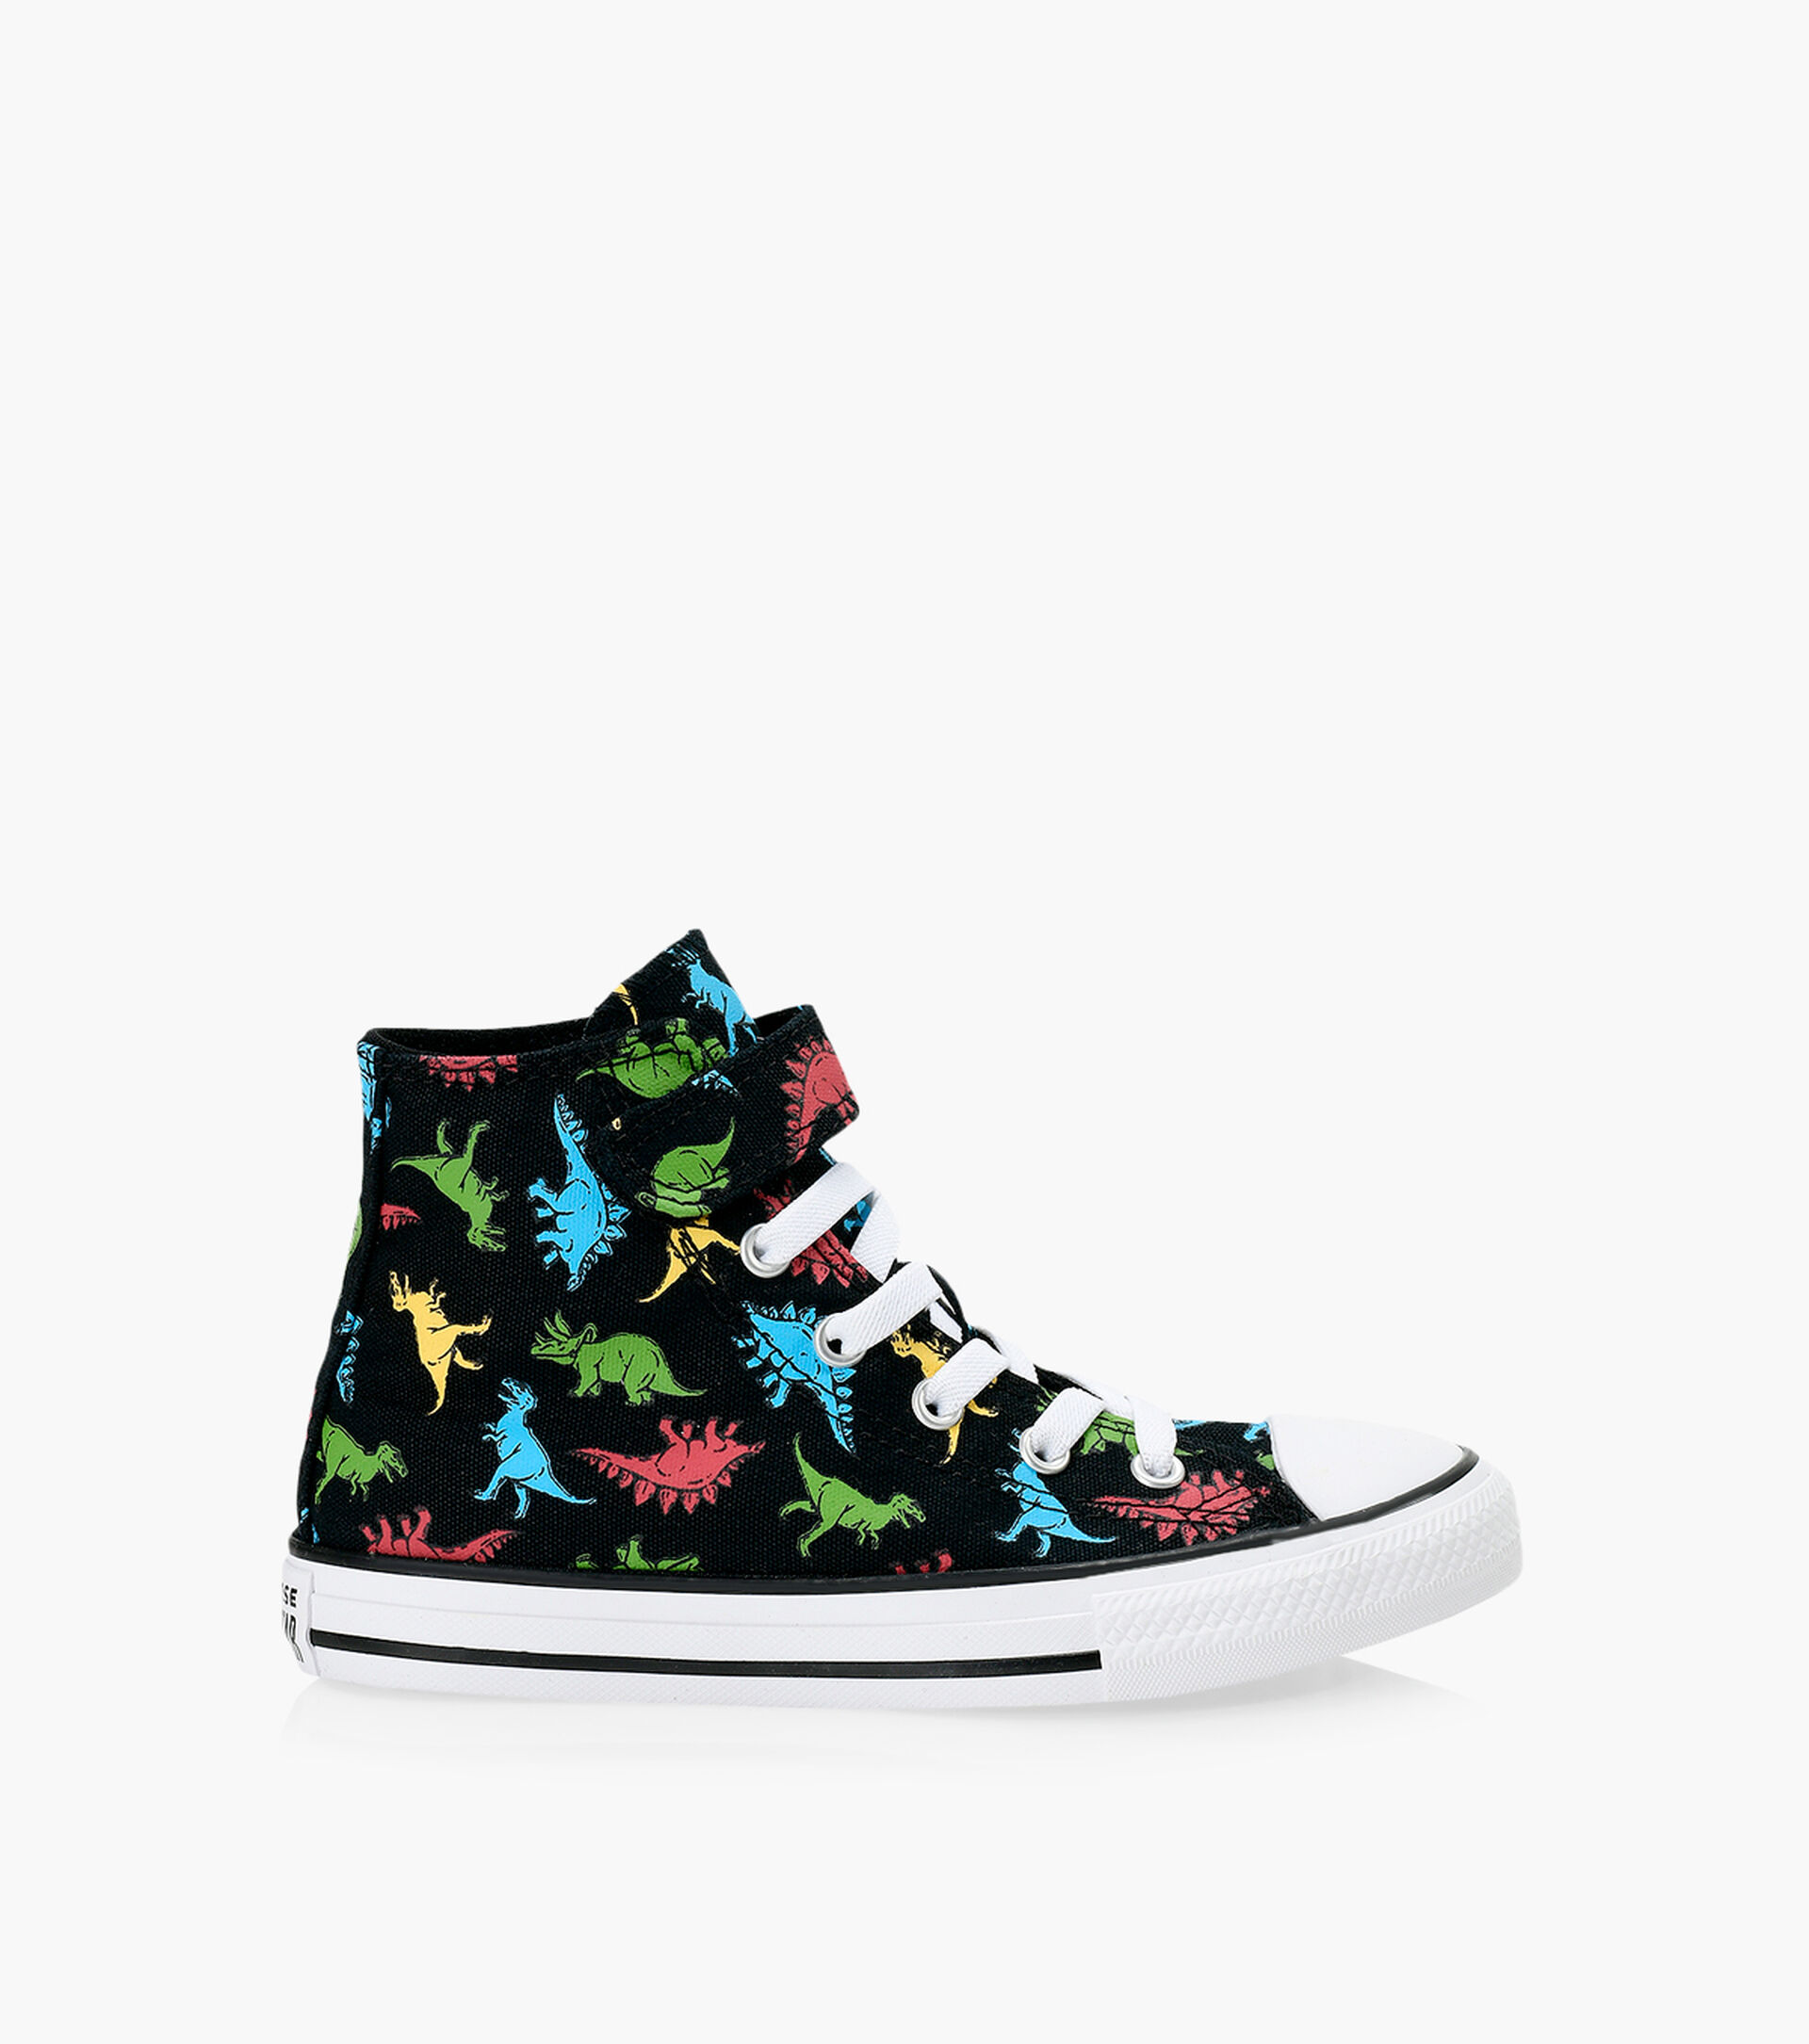 CONVERSE CHUCK TAYLOR ALL STAR 1V DINOSAURS - Black & Colour | Browns Shoes